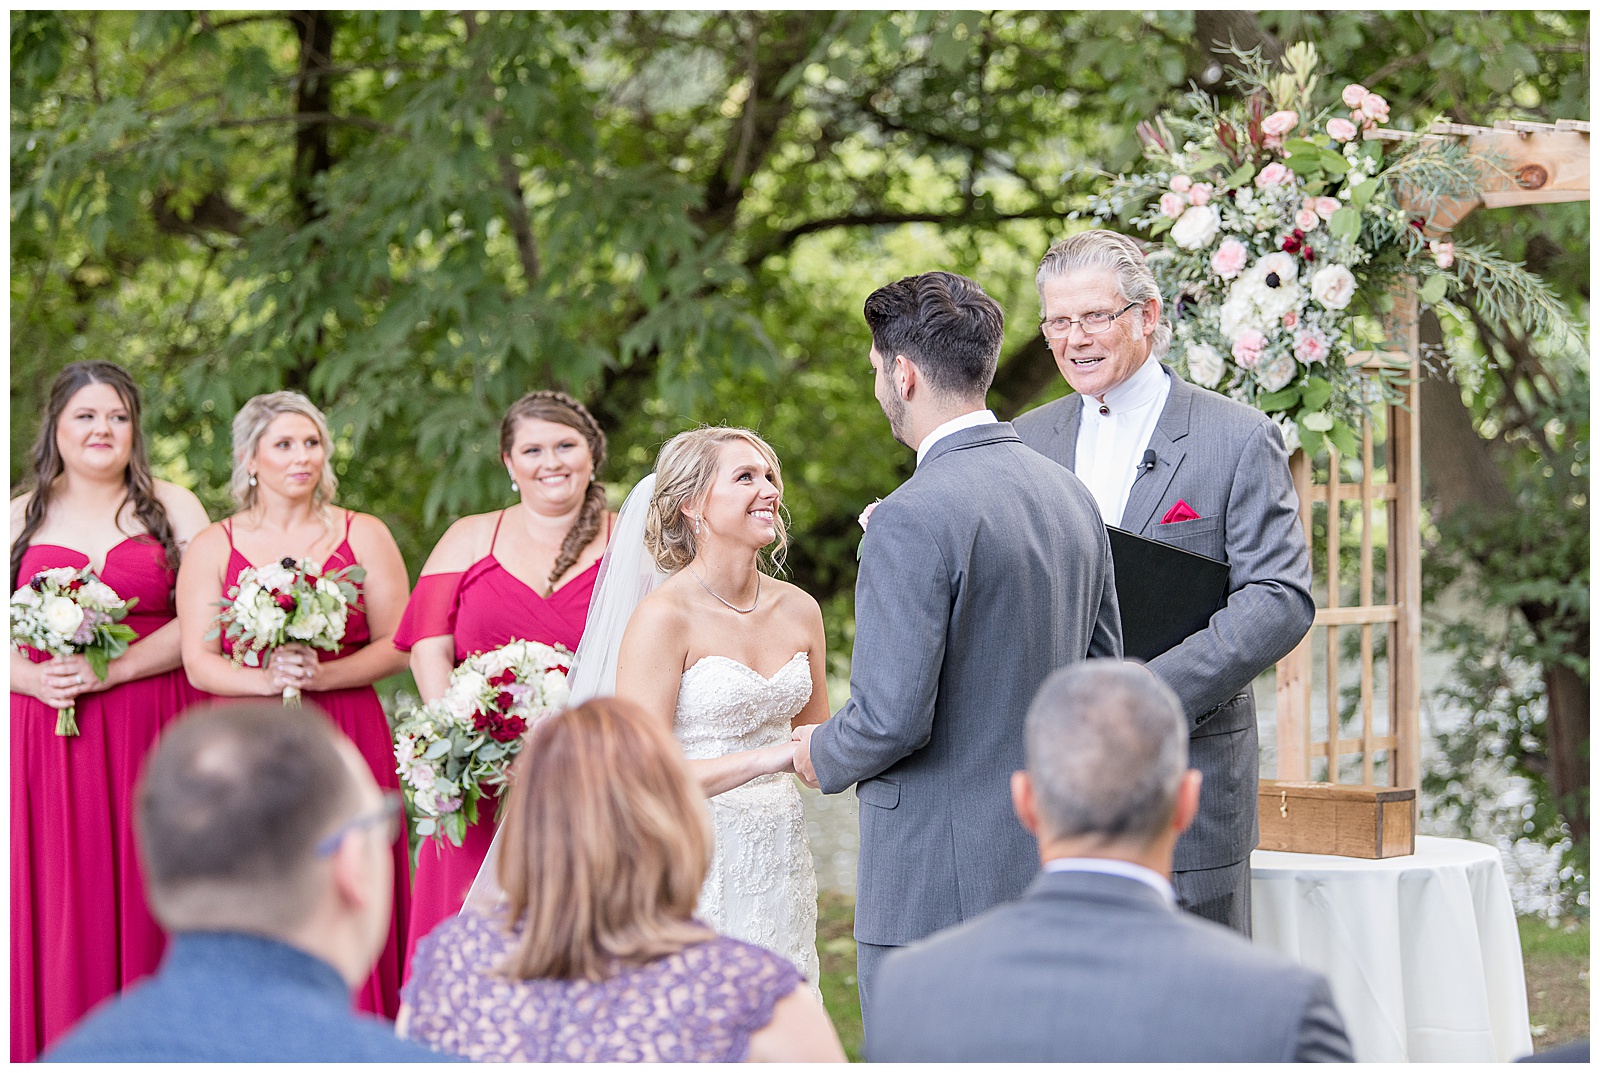 couple is facing each other with the bride on the left and her bridesmaids behind her the groom on the right and the officiant behind them and the couple is smiling and everyone is looking at them and smiling and there are guest seating at the bottom of the photo with their backs to the camera and trees are in the background and wooden archway with flowers and table with white linen tablecloth with trees in the background at Riverdale Manor in Lancaster, PA